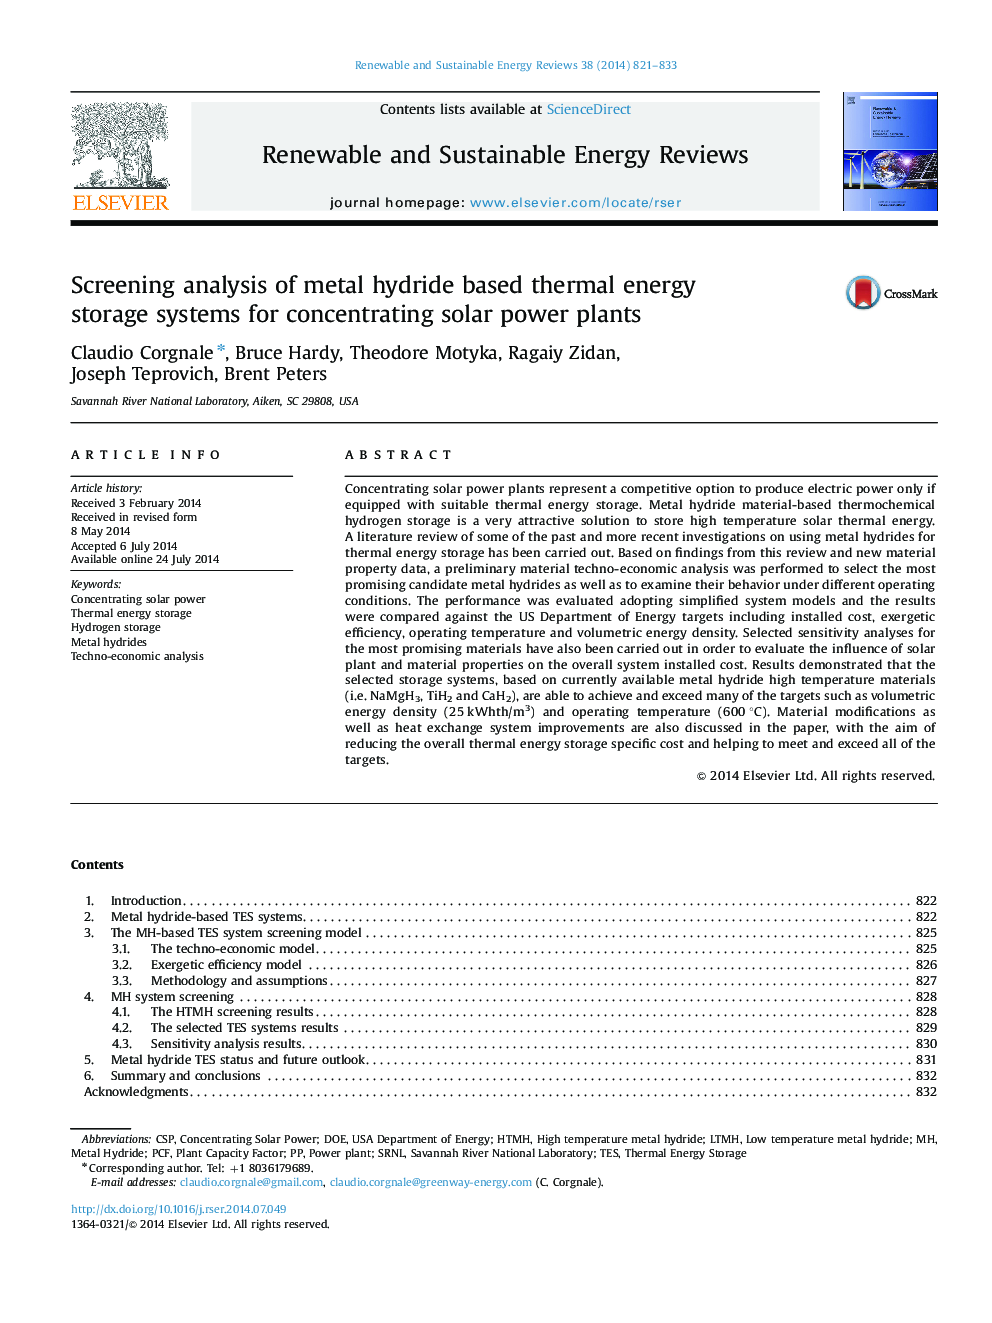 Screening analysis of metal hydride based thermal energy storage systems for concentrating solar power plants